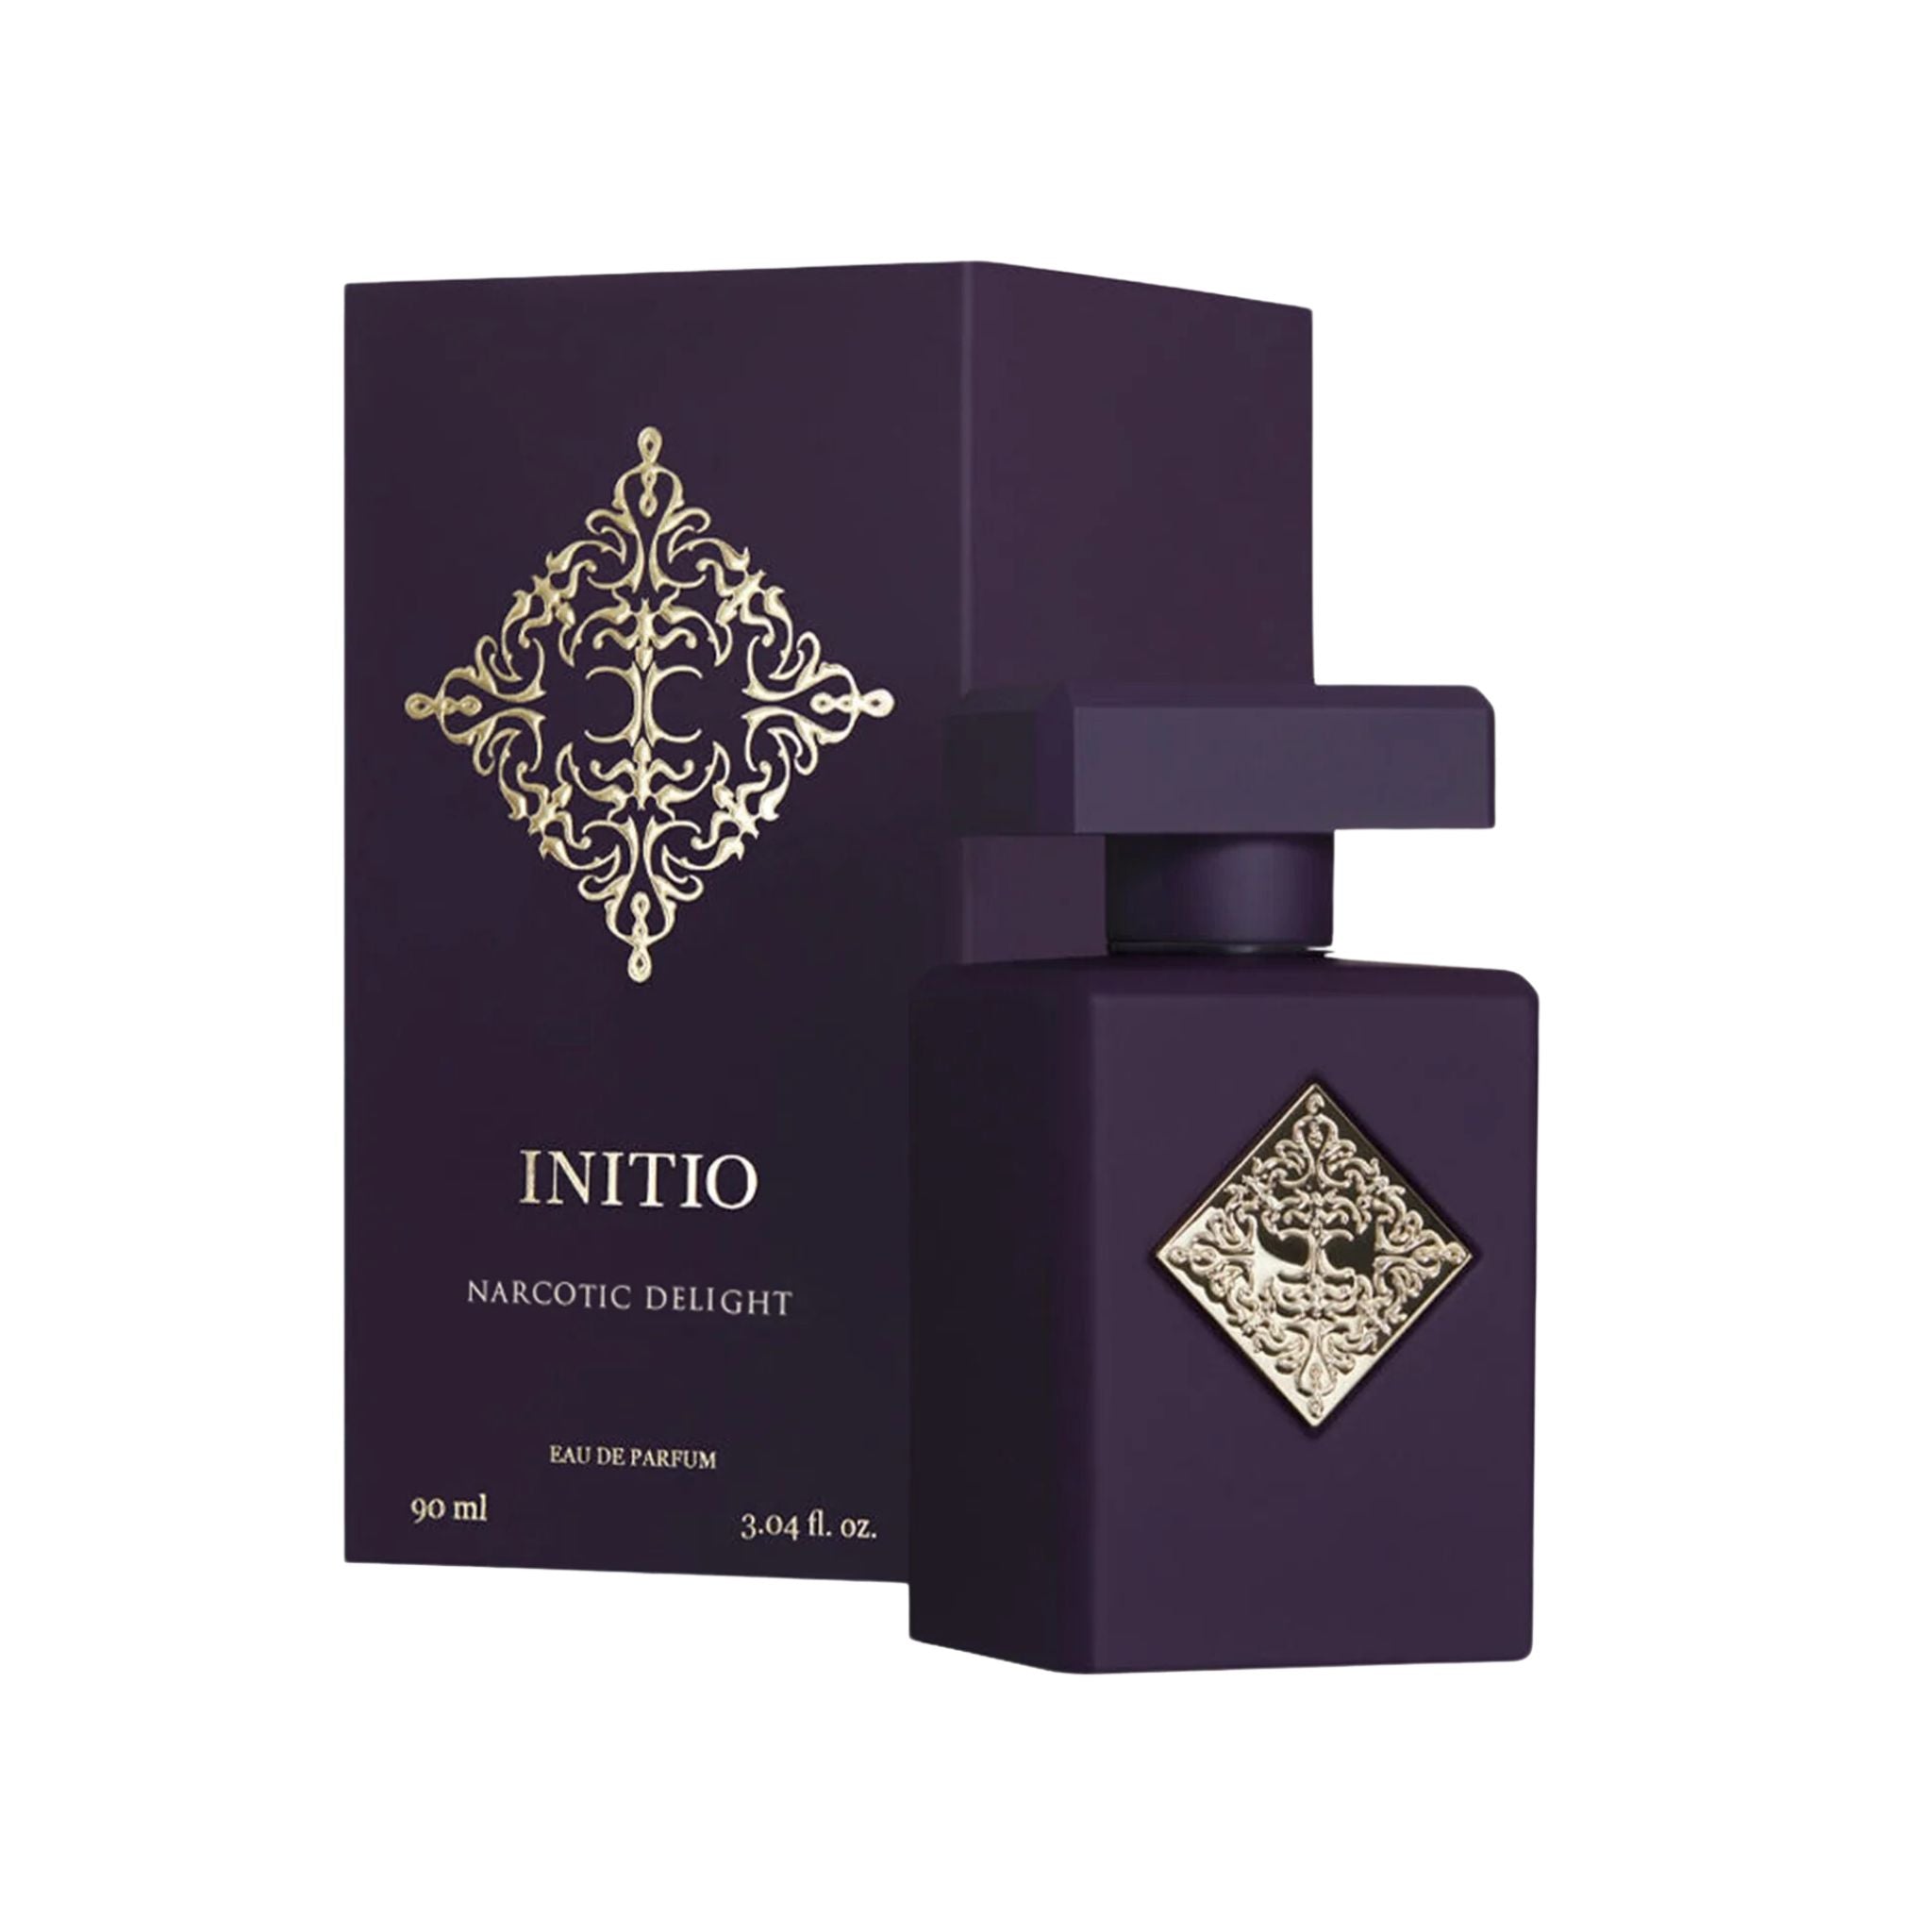 Narcotic Delight Initio Perfume